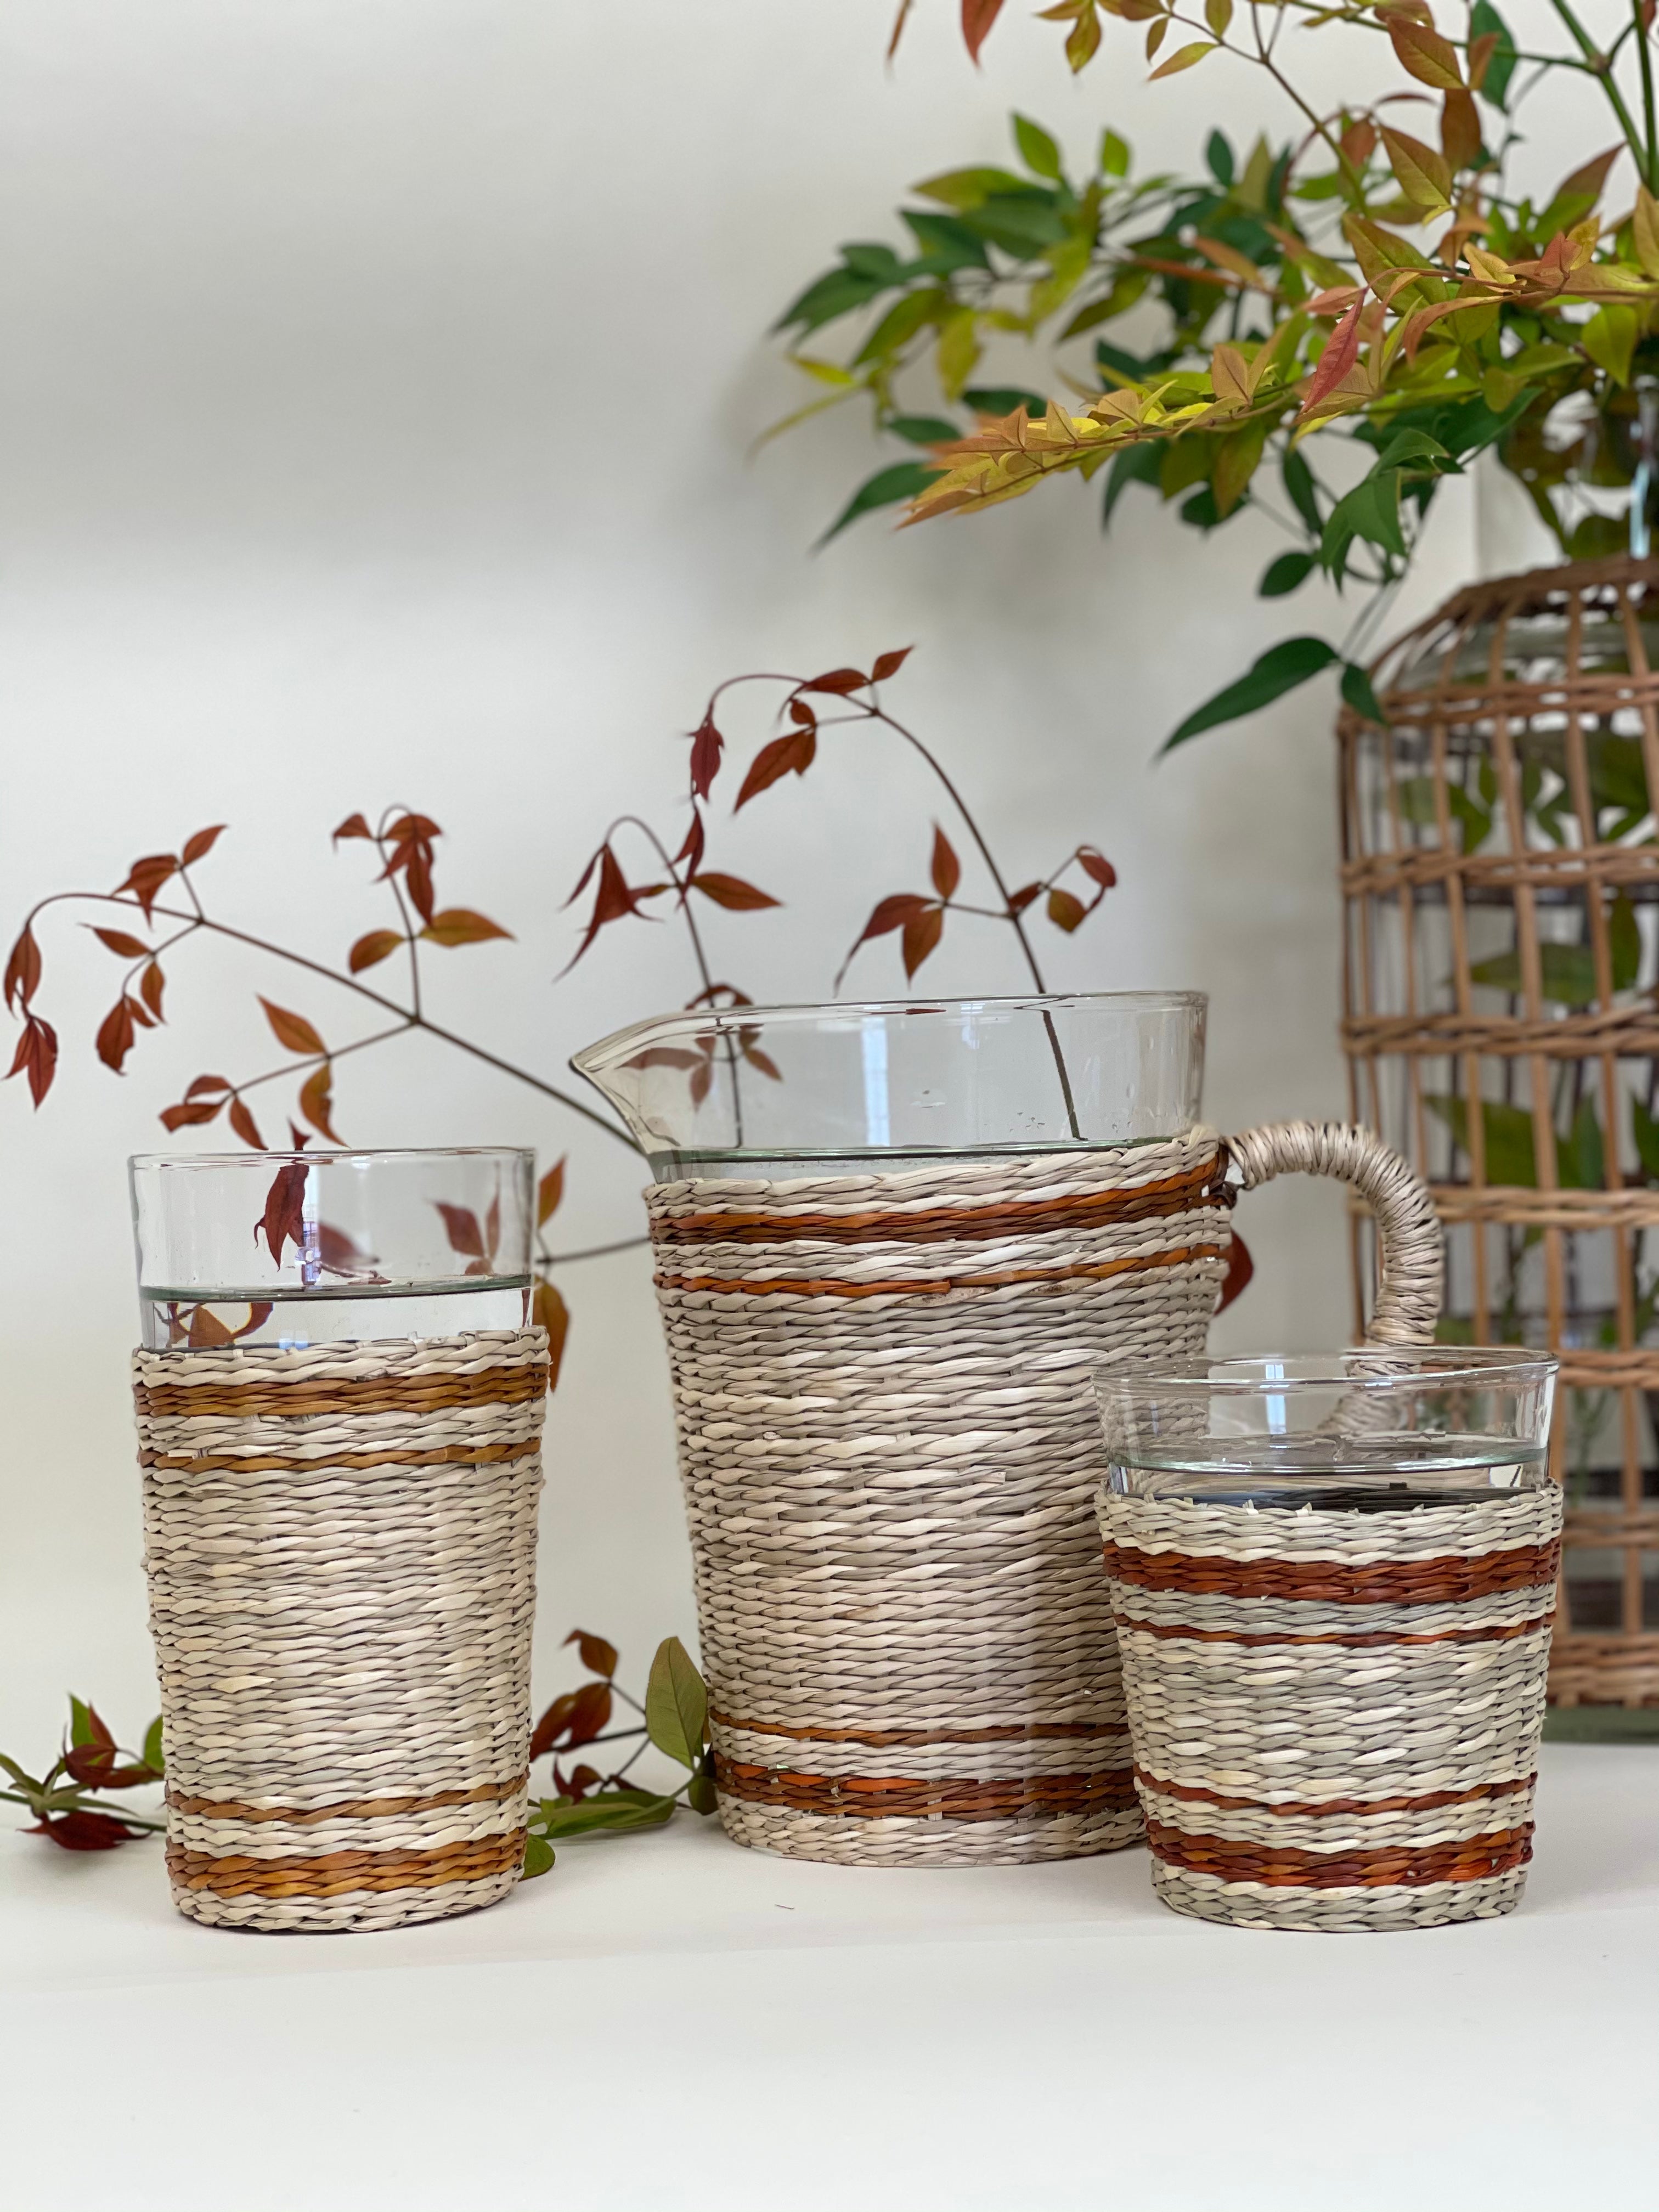 Brown Striped Seagrass Wide Tumbler (Now 25% off!) Glass Seagrass Brand_Seagrass & Rattan Kitchen_Drinkware lm New Arrivals Seagrass Summer Clean Up summer sale Tumblers & Highballs sepiaambiance2